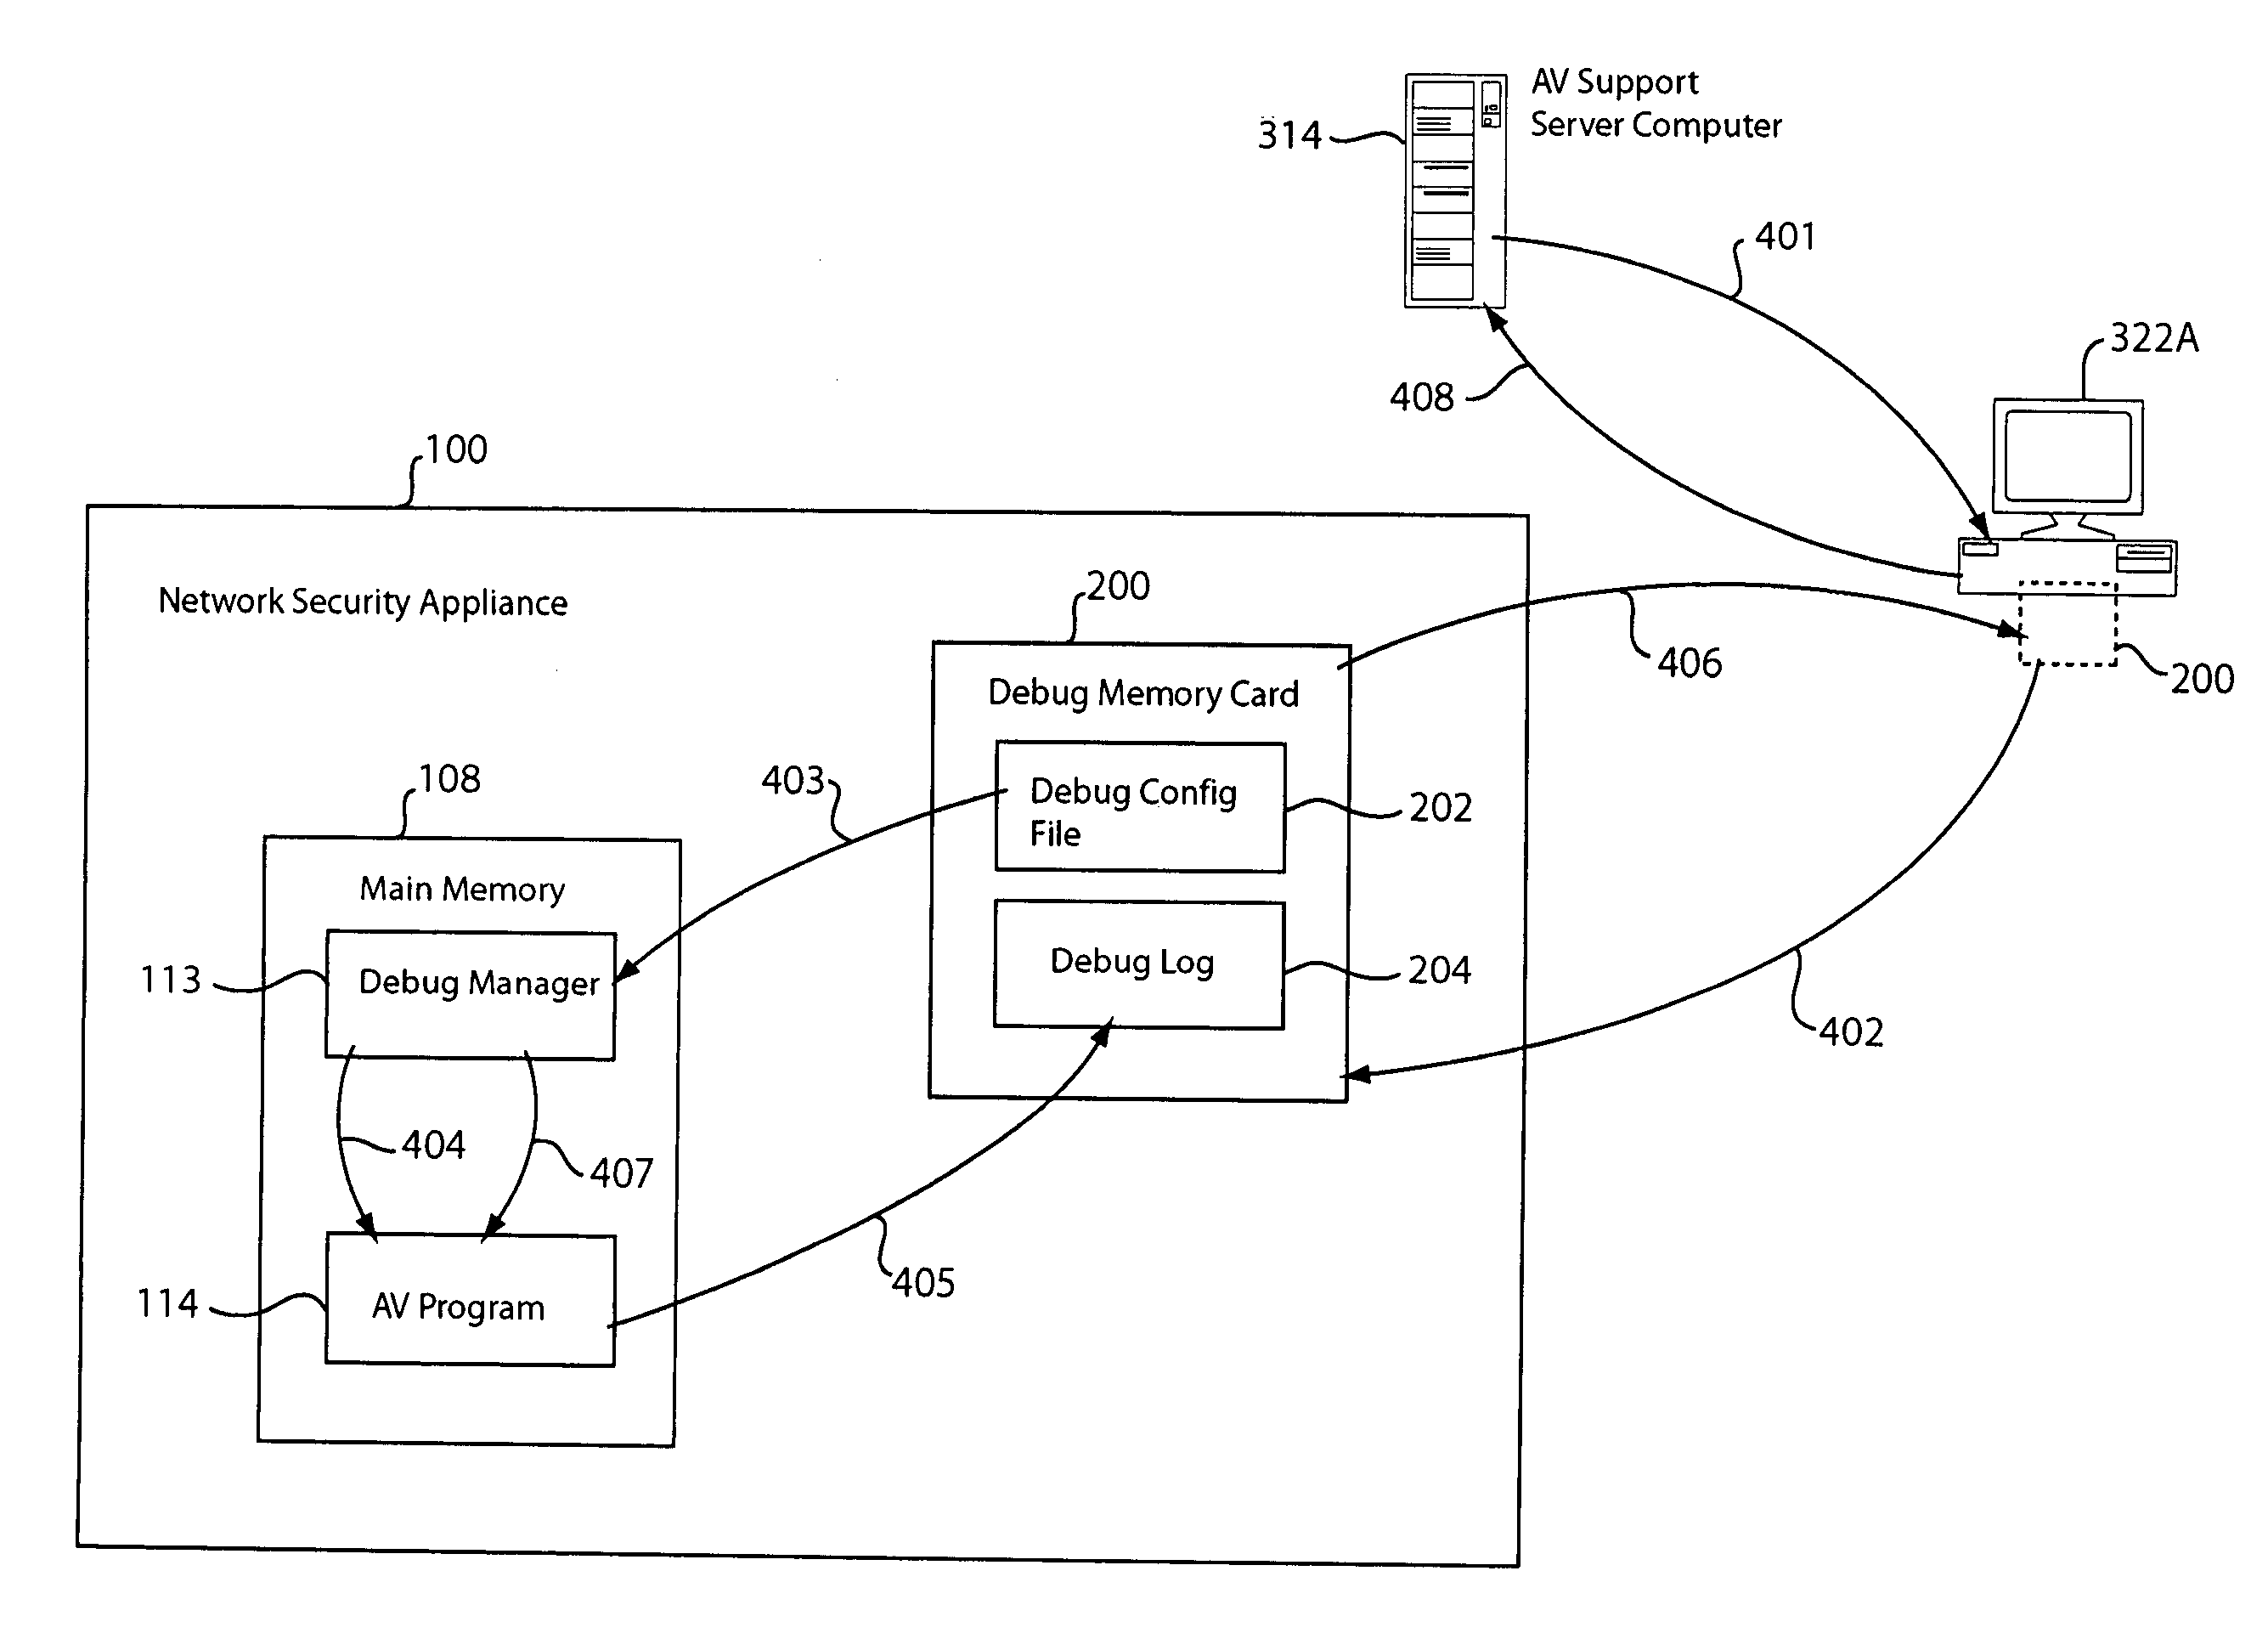 Generation of debug information for debugging a network security appliance